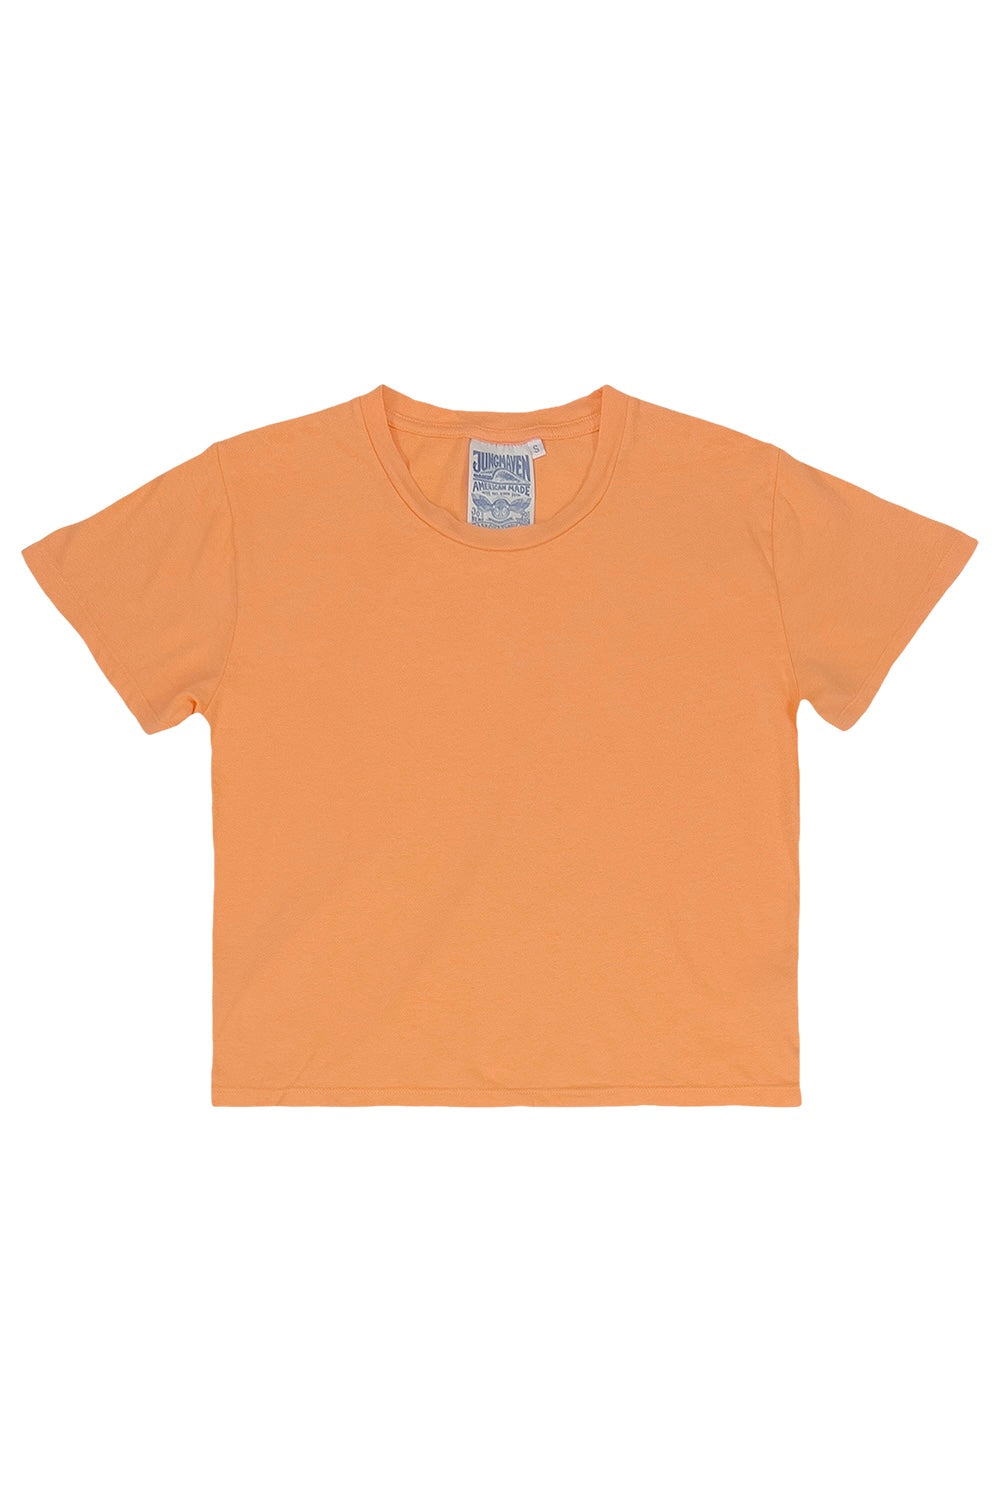 Cropped Ojai Tee | Jungmaven Hemp Clothing & Accessories / Color: Apricot Crush